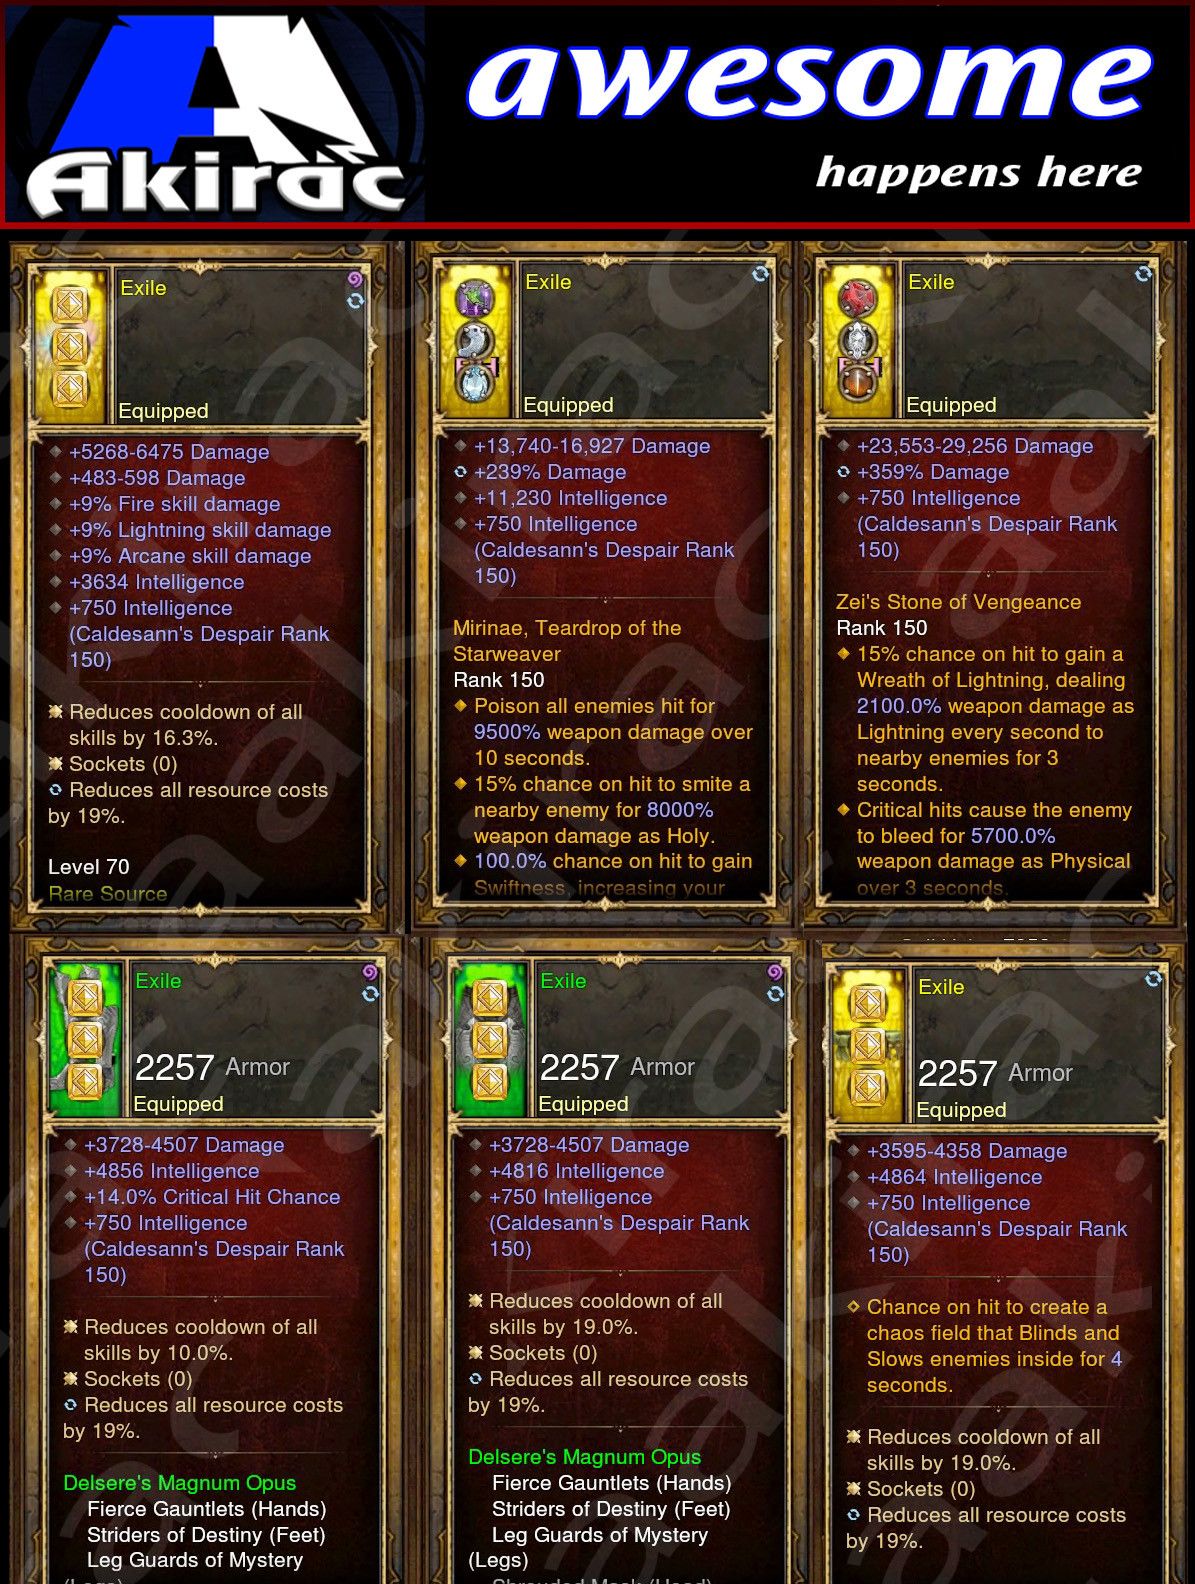 Diablo 3 Immortal v1 Magnum Opus Wizard Set for Rift 80-130 Exile Diablo 3 Mods ROS Seasonal and Non Seasonal Save Mod - Modded Items and Gear - Hacks - Cheats - Trainers for Playstation 4 - Playstation 5 - Nintendo Switch - Xbox One